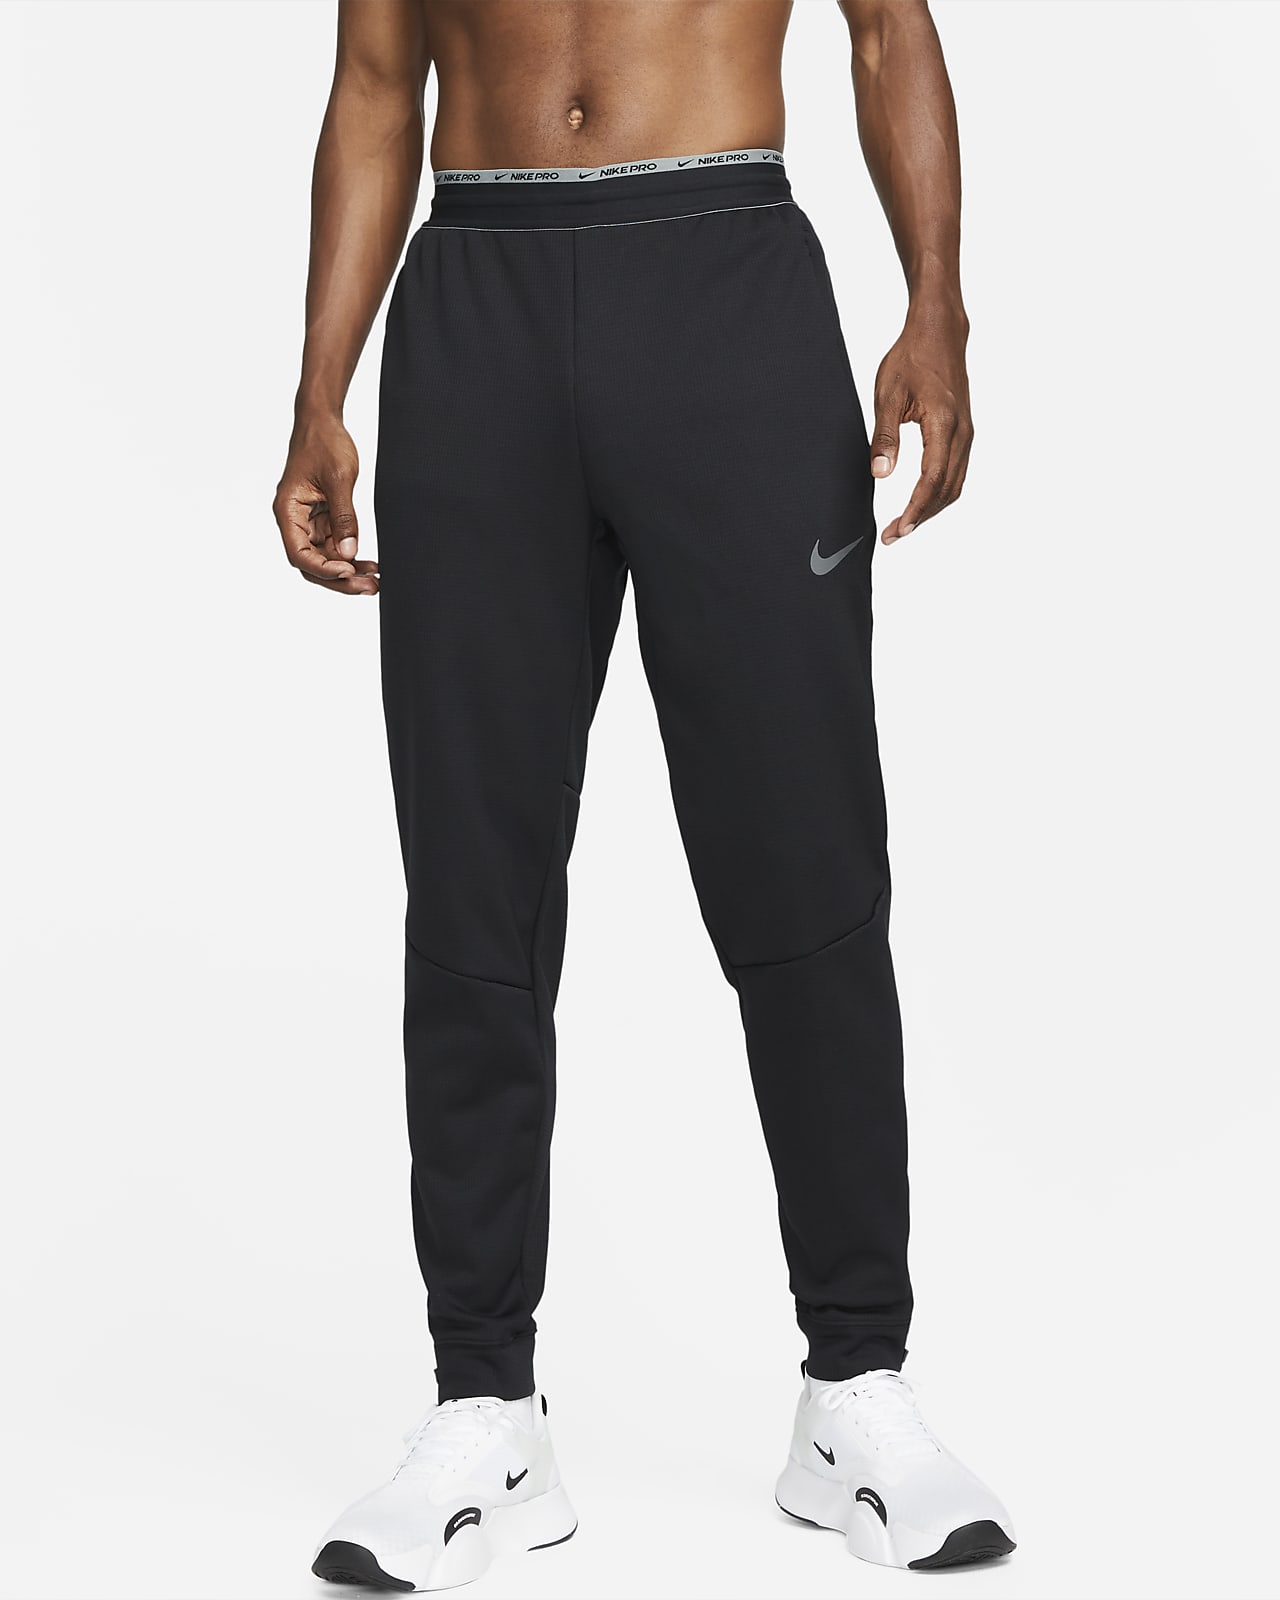 Men's Soccer Pants For Warm Up & Play